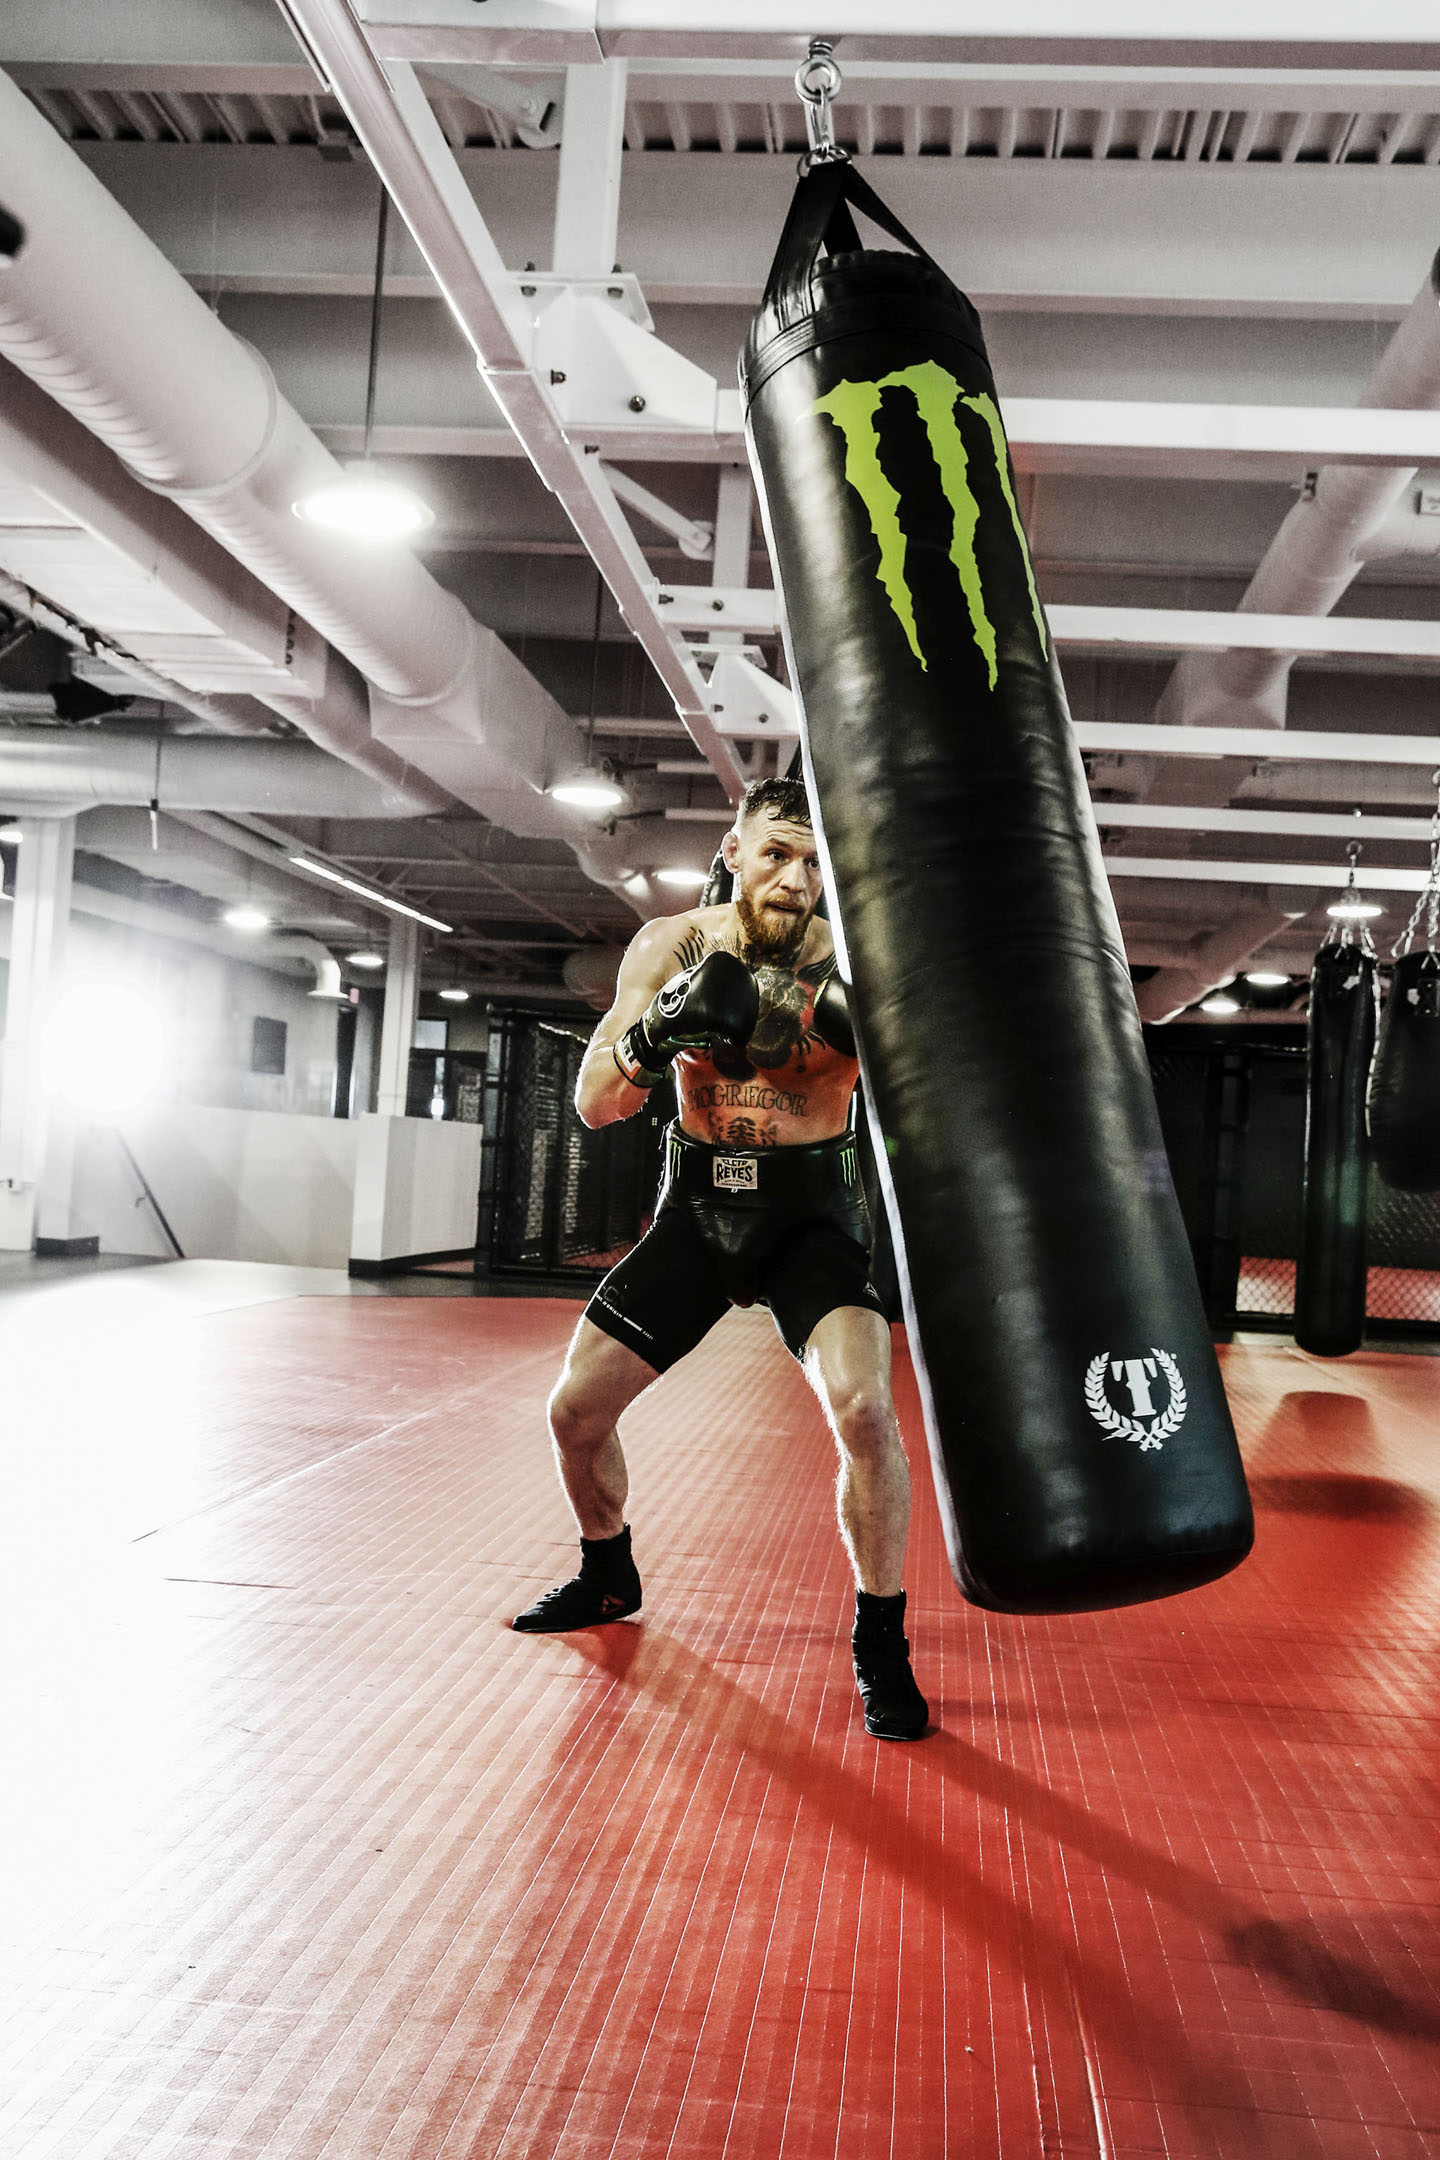 Monster Energy Announces Continued Sponsorship Deal With MMA Superstar  Conor “The Notorious” McGregor